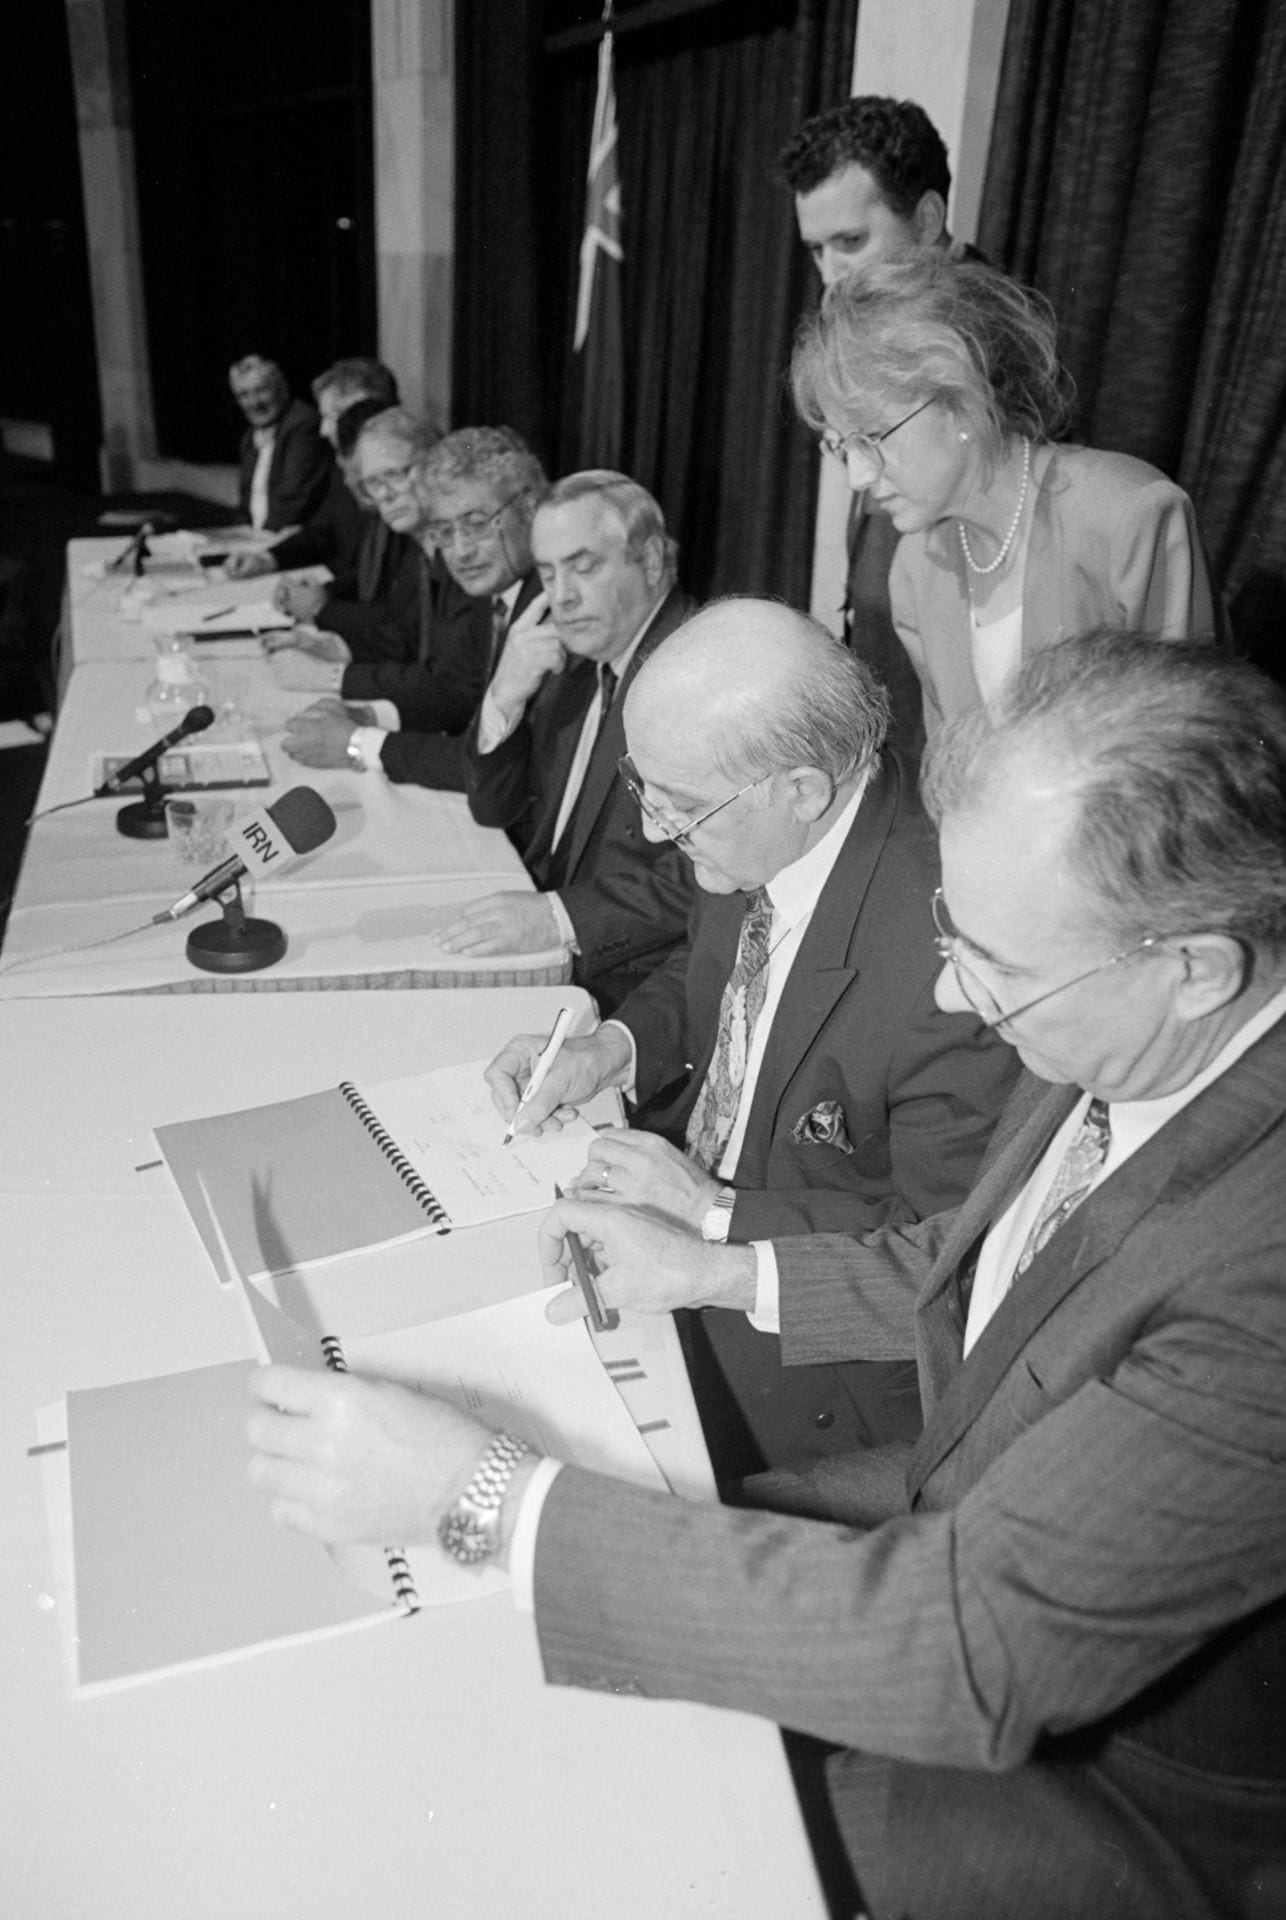 The signing of the Māori Fisheries Settlement 1992. From right: Sir Don McKinnon, Tā Tipene O'Regan, Sir Douglas Graham and others involved in negotiations. Image credit: Michael Smith, Dominion Post Collection, National Library of New Zealand Te Puna Mātauranga o Aotearoa, Alexander Turnbull Library, Wellington.